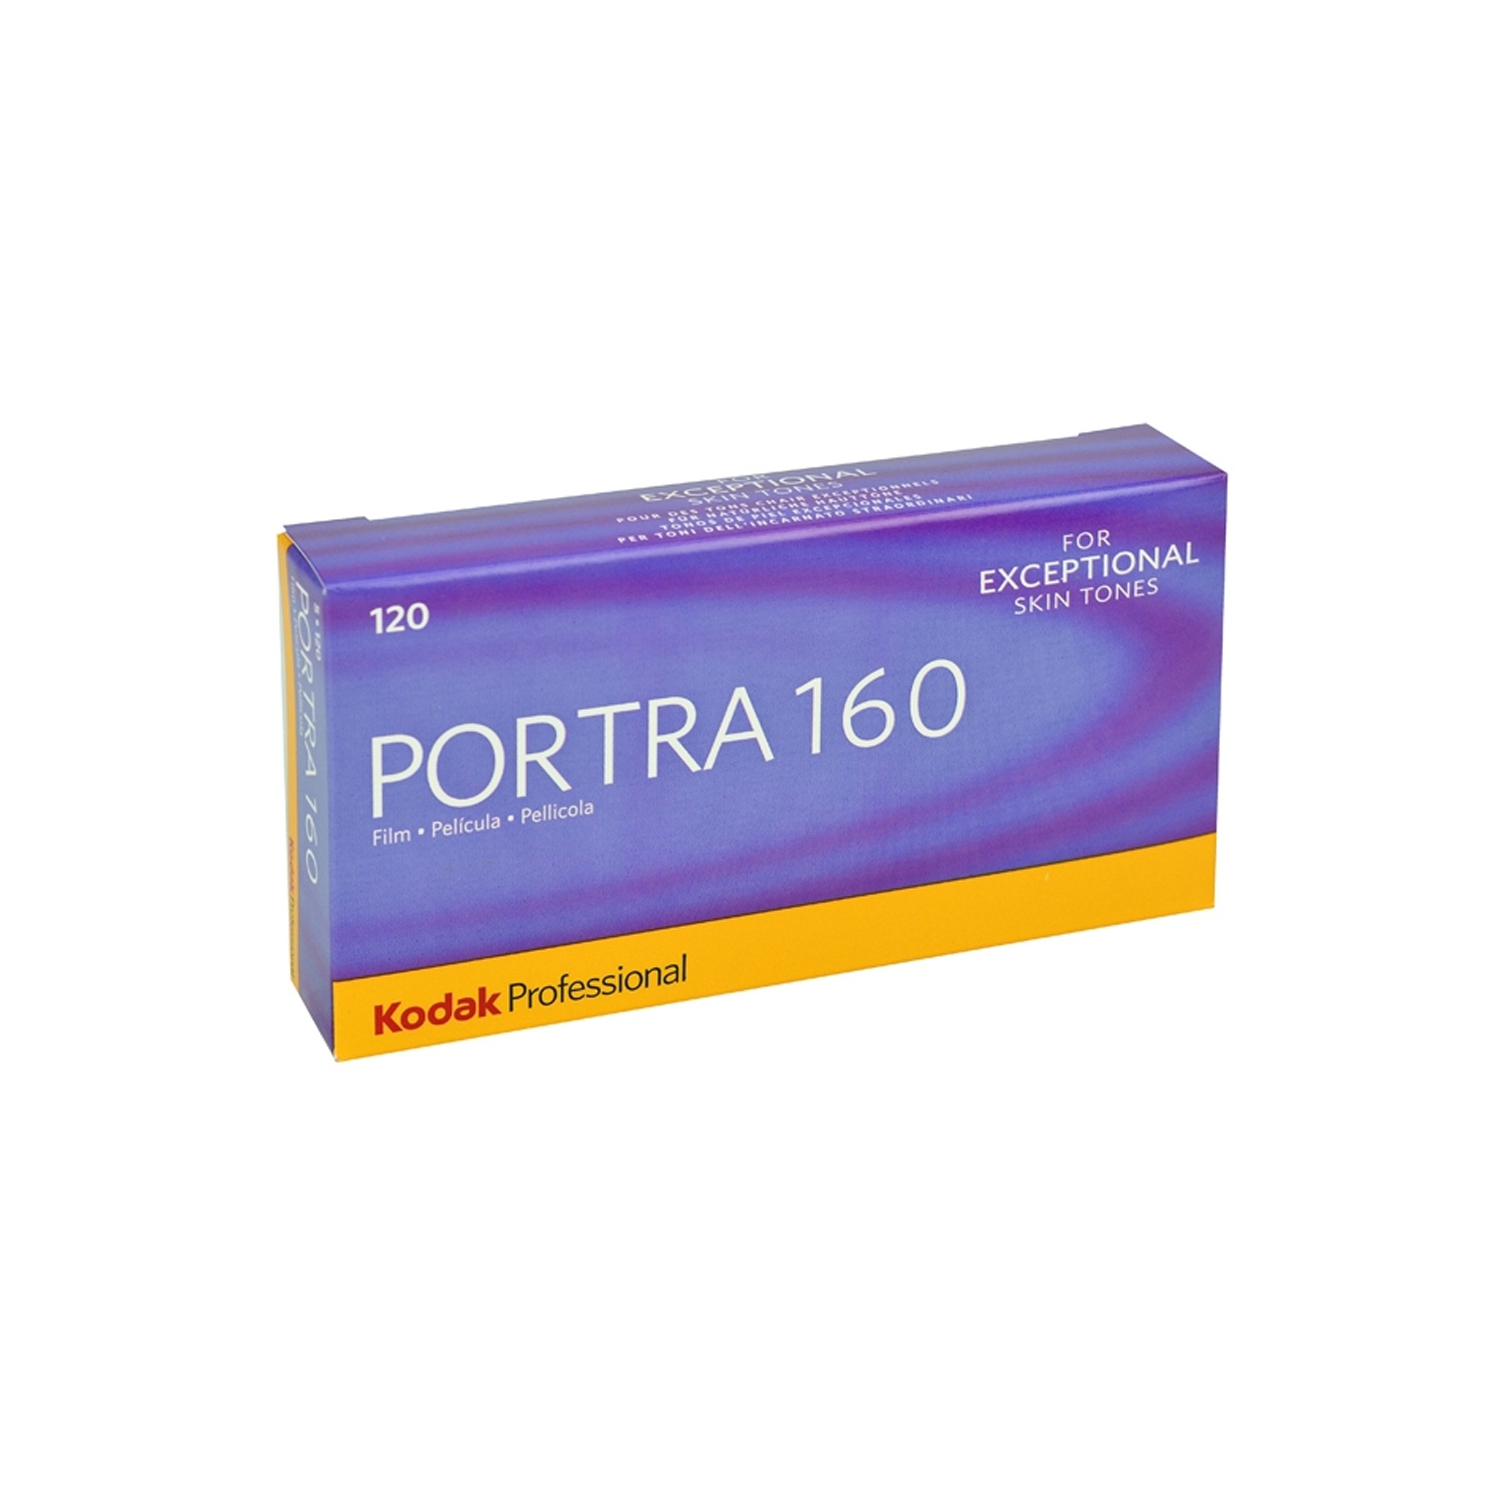 Kodak Portra 160 Color Negative Film, ISO 160, Size 120, Pack Of 5 For Exceptional Skin Tones